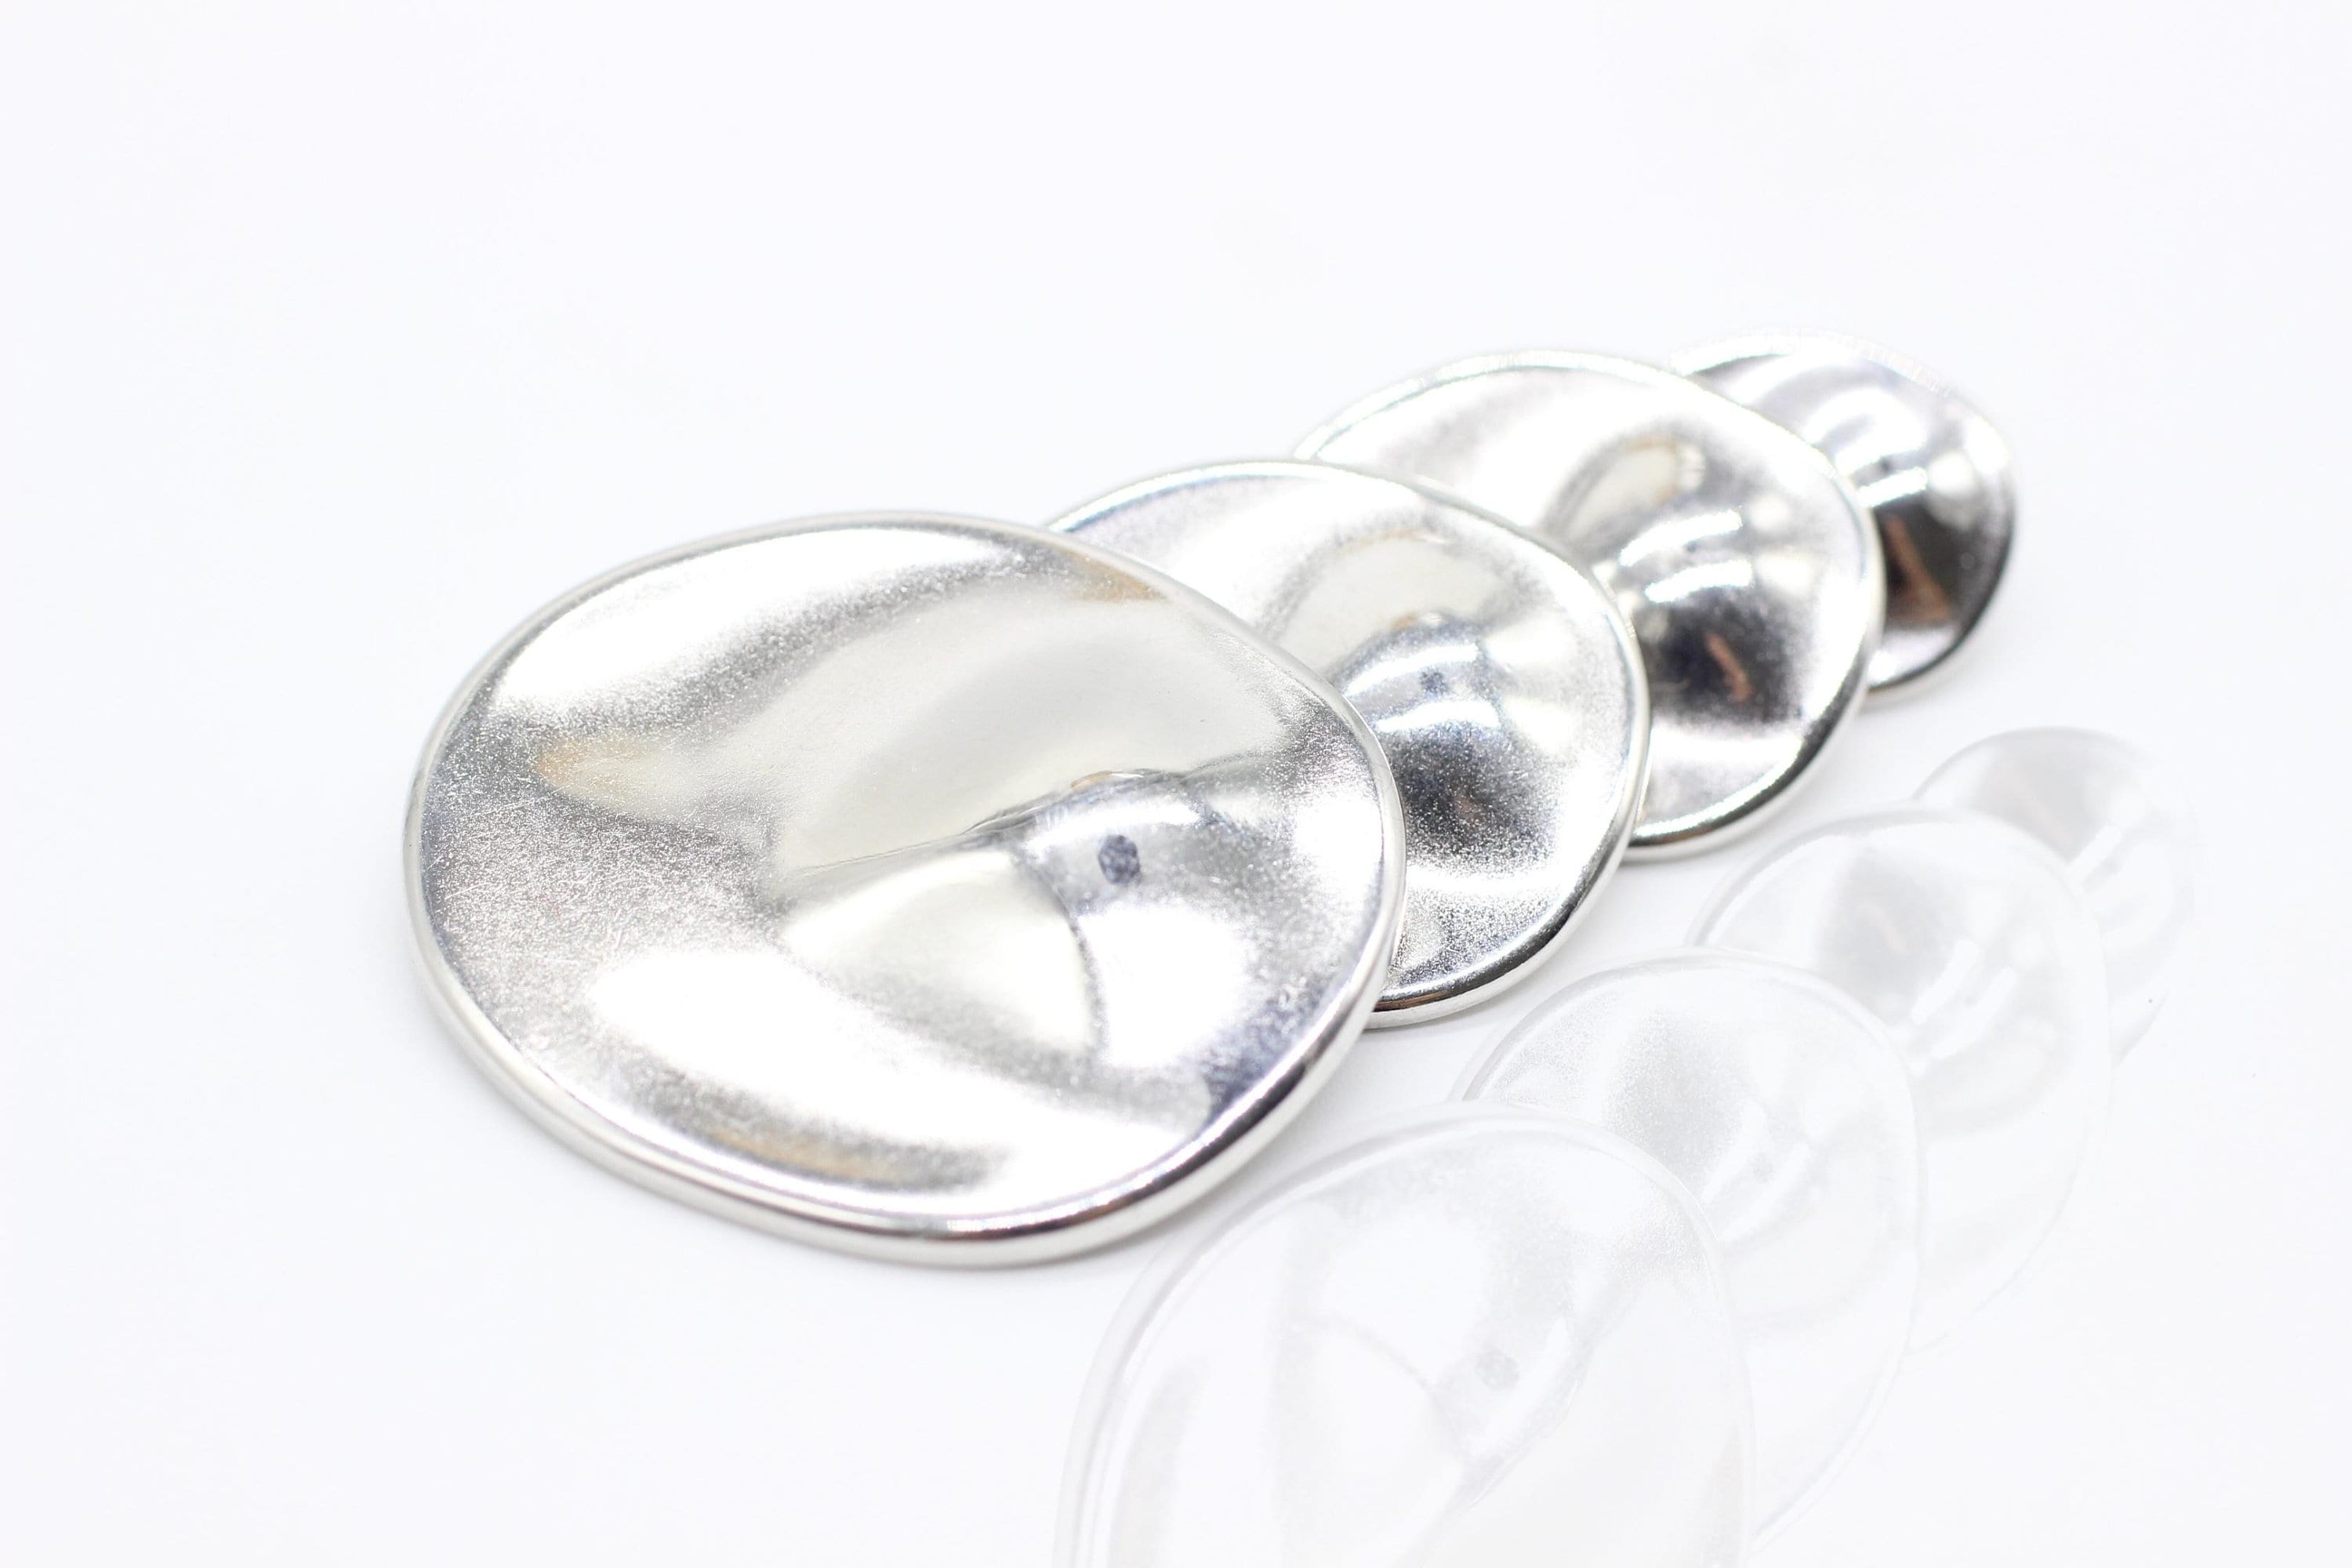 10 X 16mm Silver Metallic Buttons With Two Holes, Flat Silver